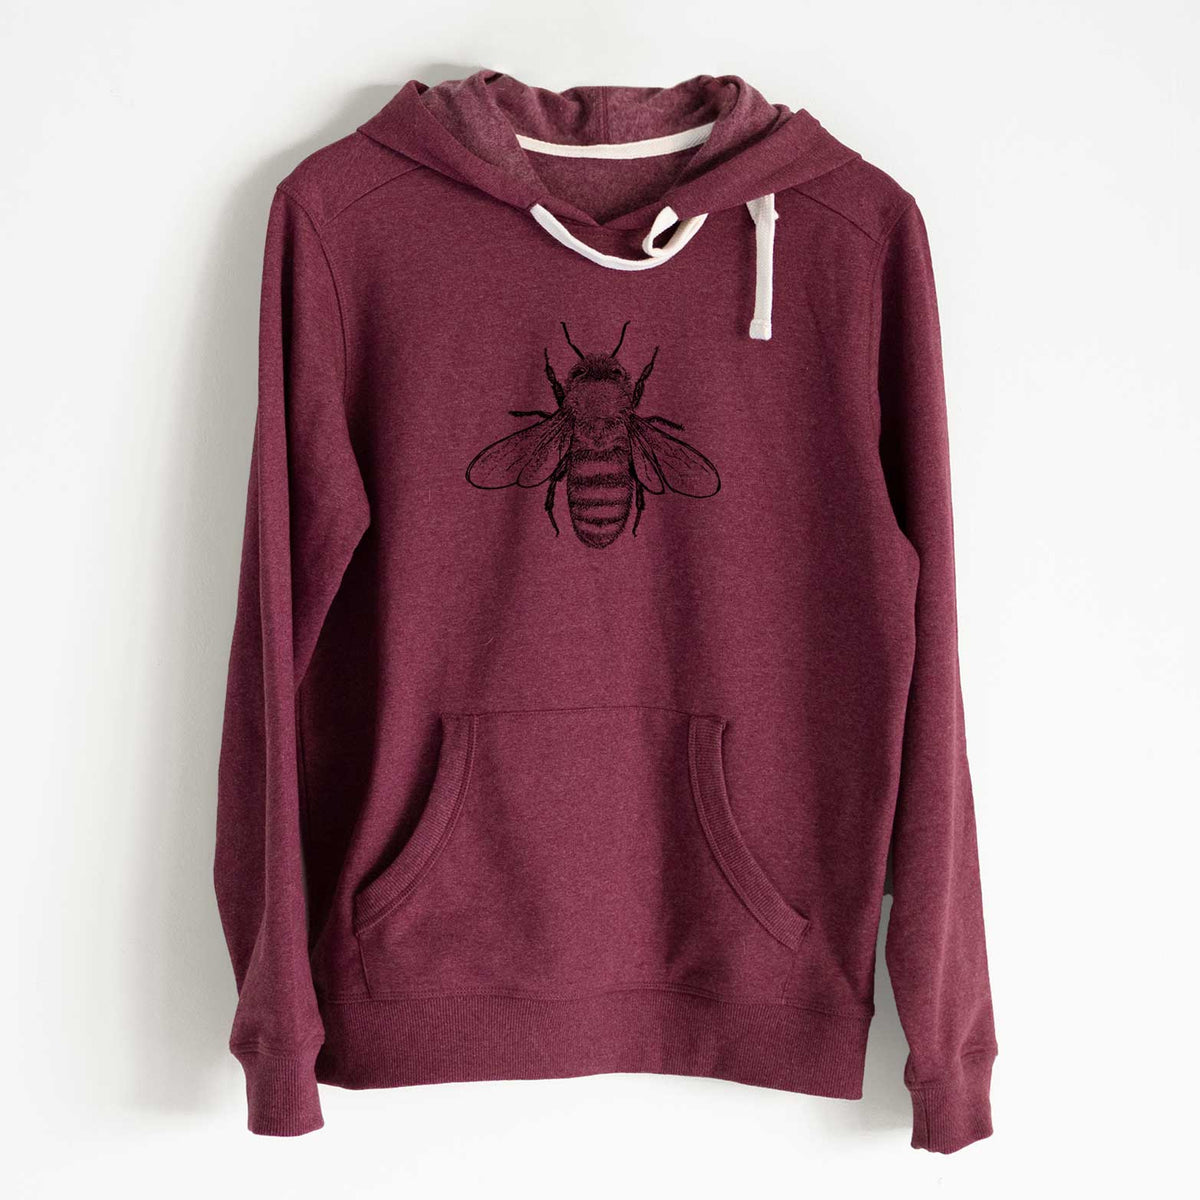 Apis Mellifera - Honey Bee - Unisex Recycled Hoodie - CLOSEOUT - FINAL SALE